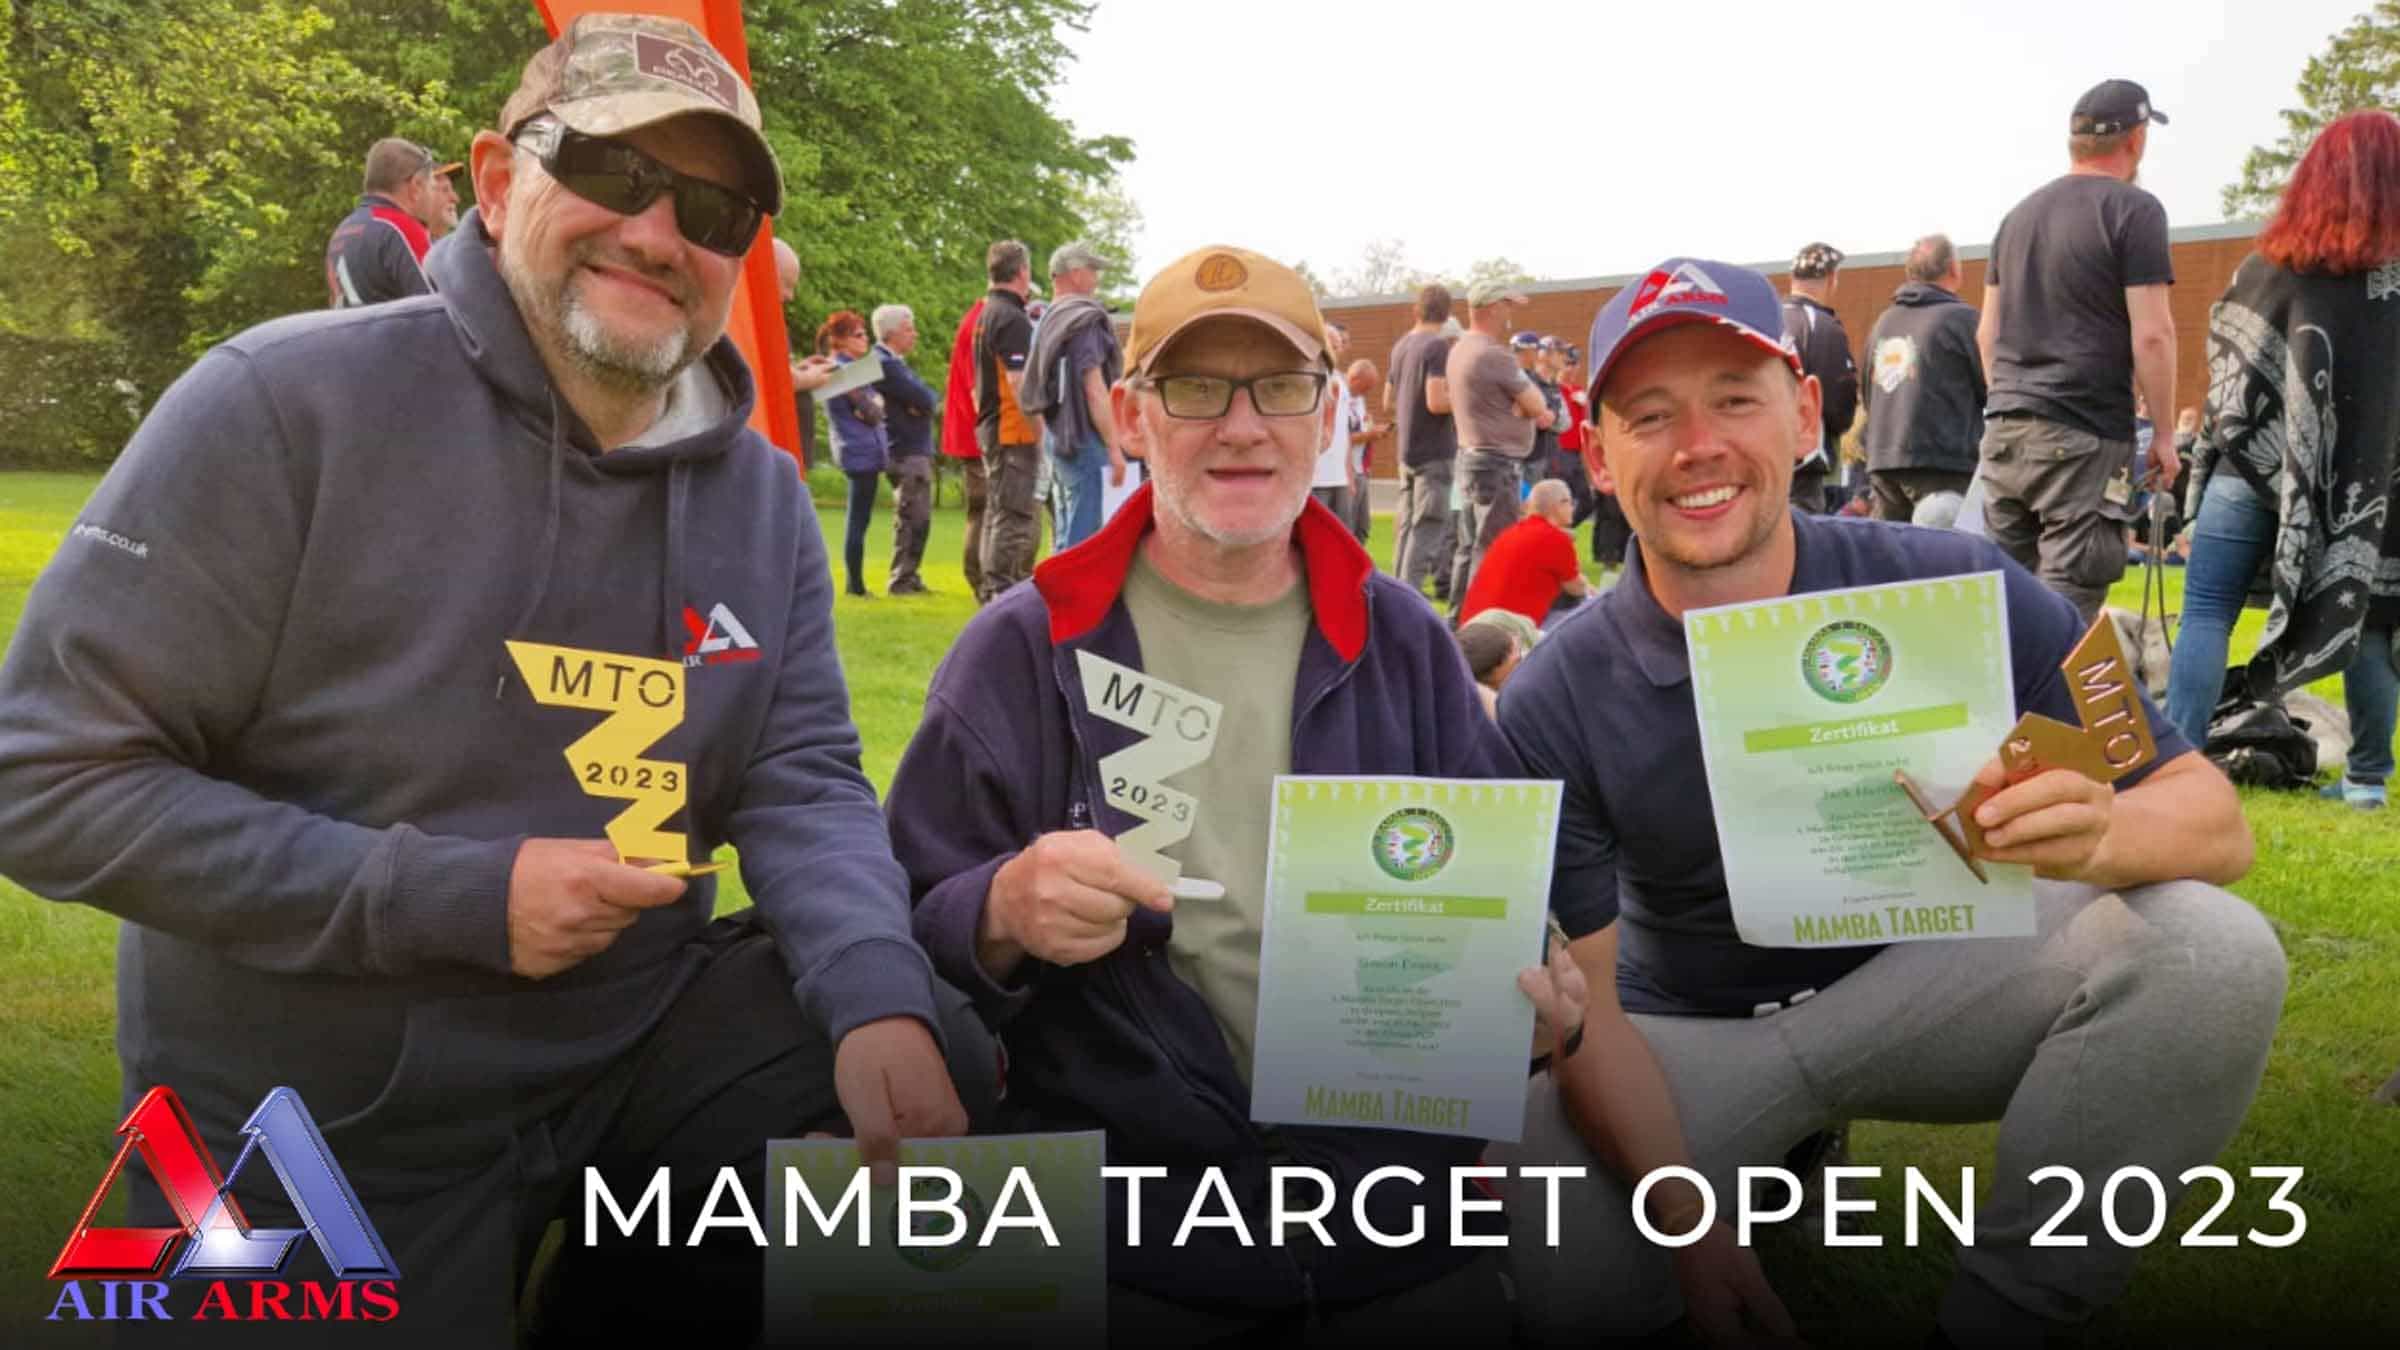 Air Arms takes top honours at the Mamba Target Open 2023